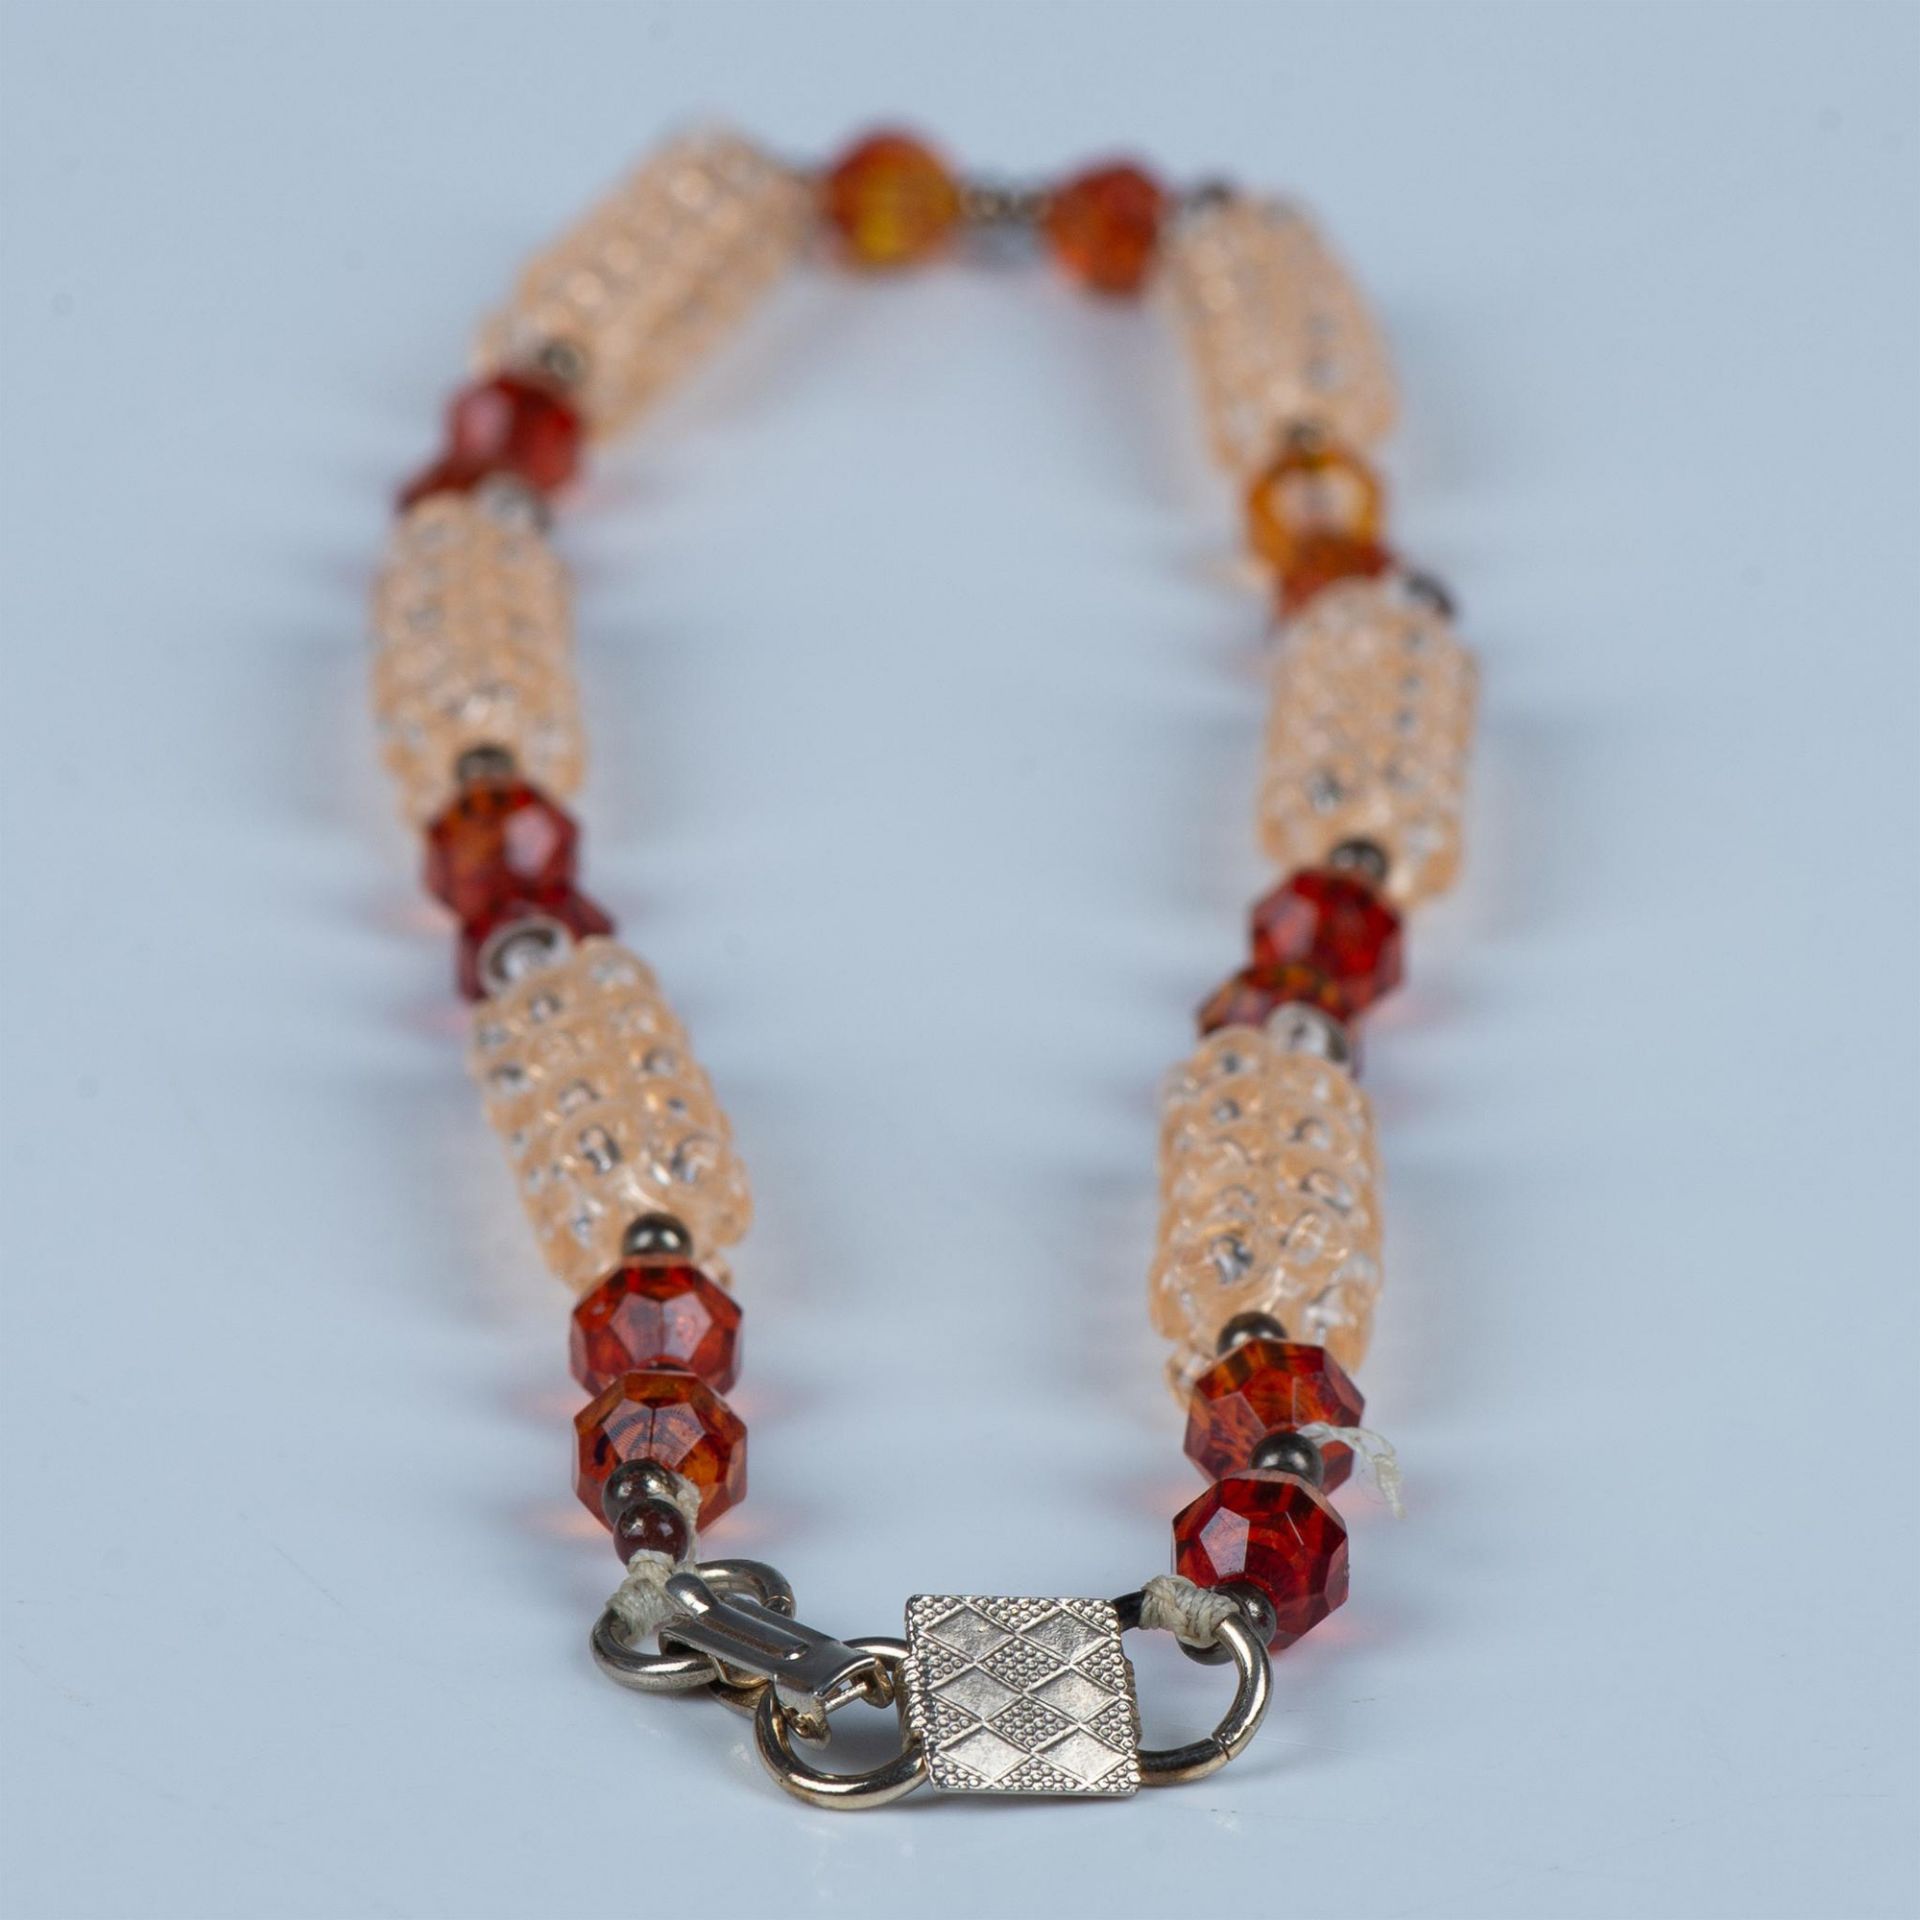 Cute Peach and Amber Colored Bead Necklace - Bild 3 aus 3